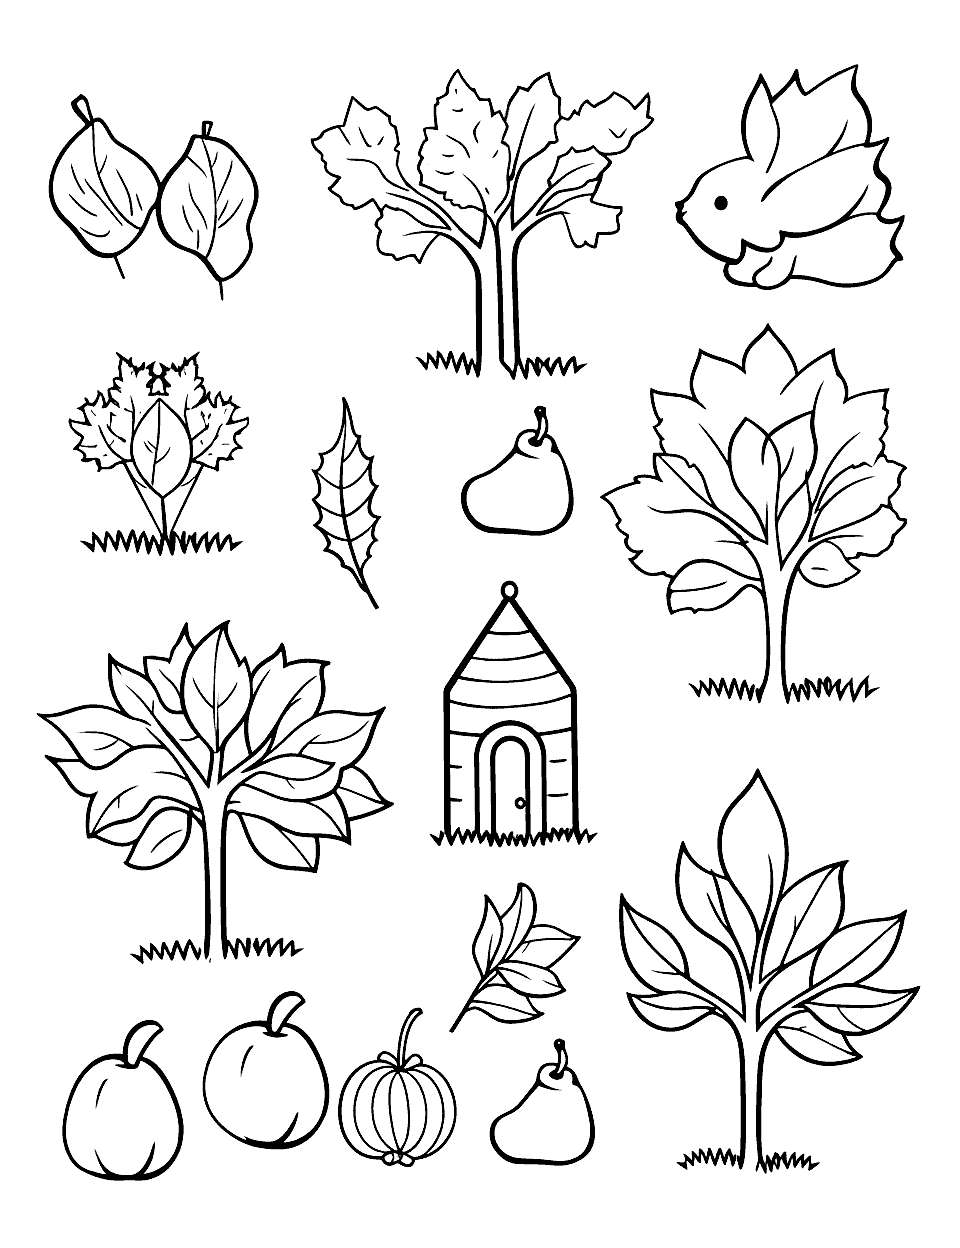 Mini Autumn Collection Fall Coloring Page - A series of mini autumn scenes to color, featuring animals, leaves, and holiday themes.